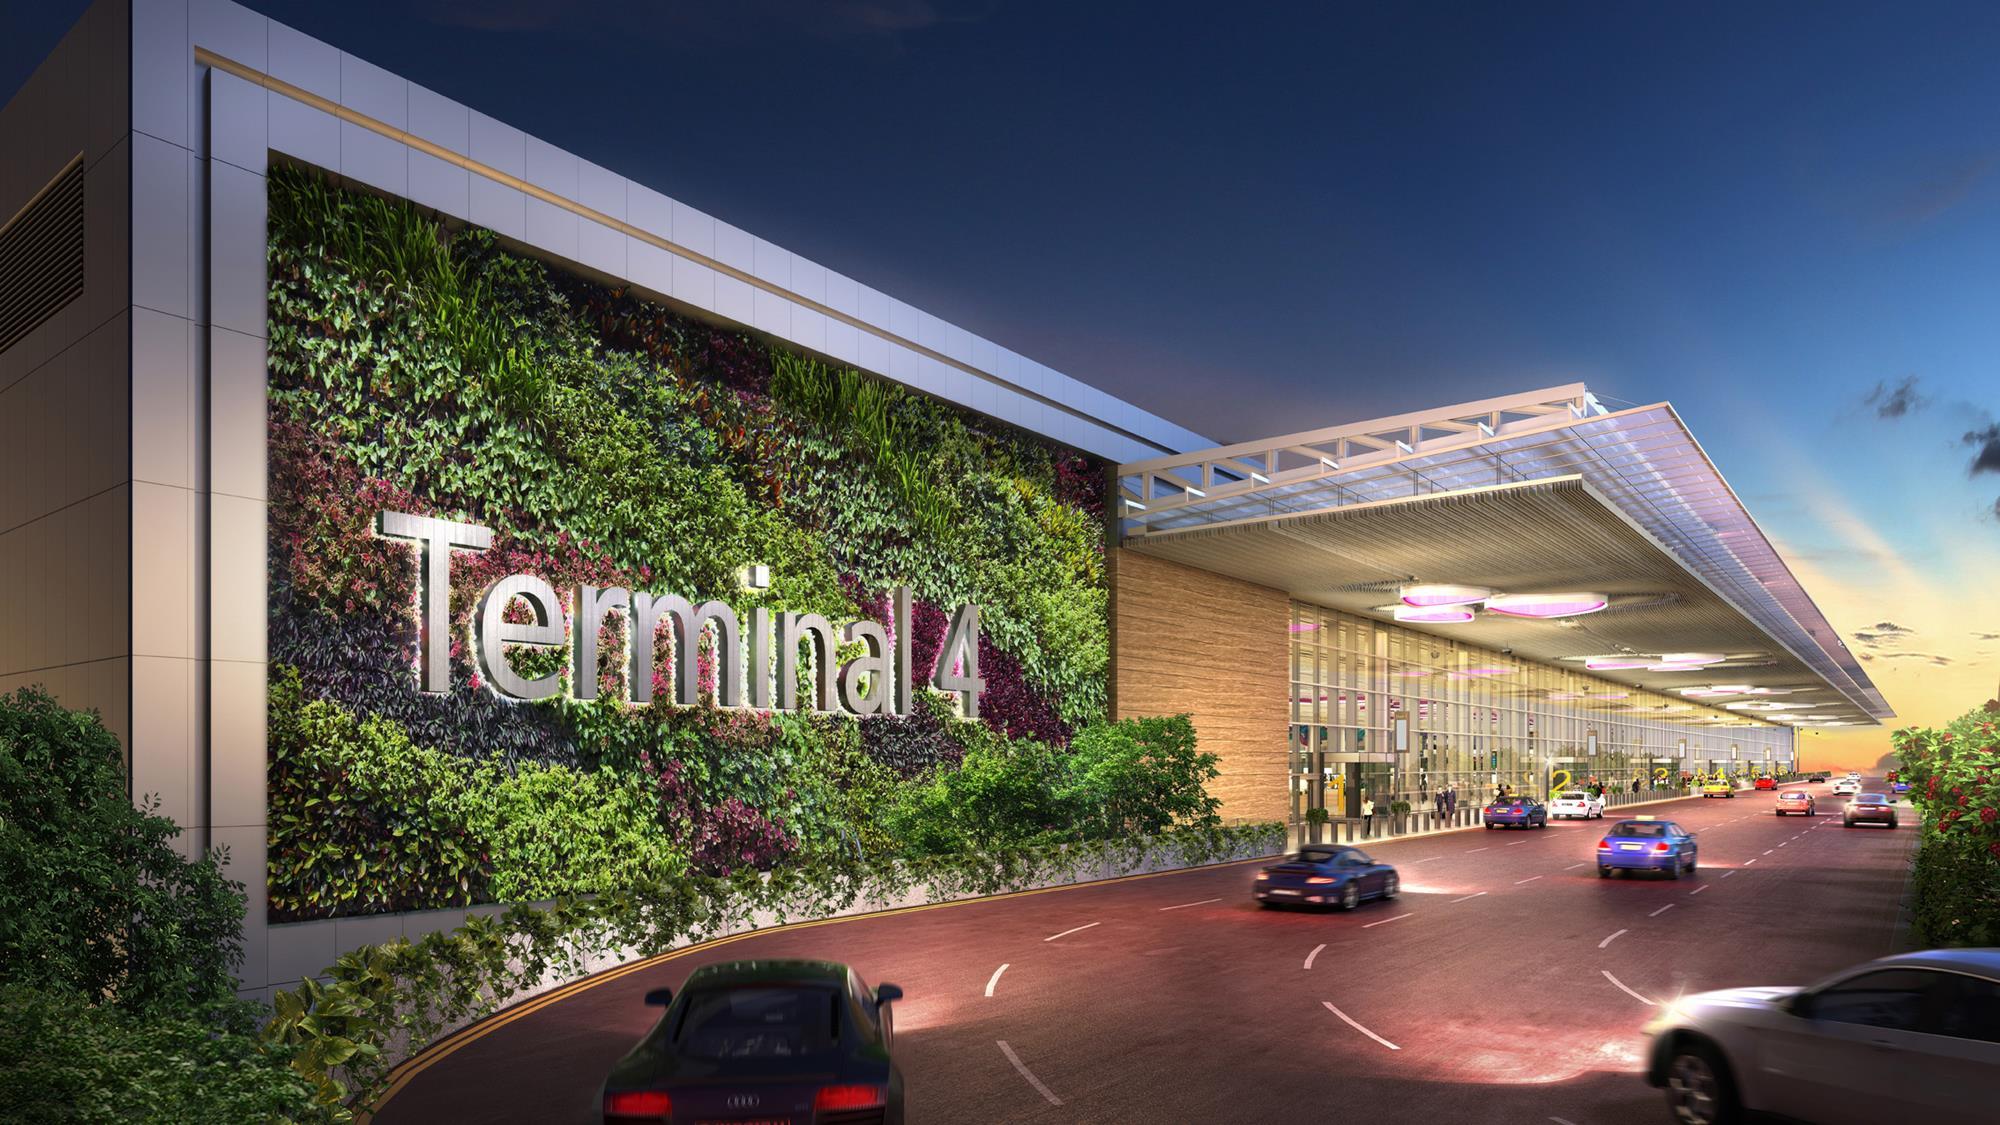 Terminal 5 project at Changi Airport to resume - Passenger Terminal Today